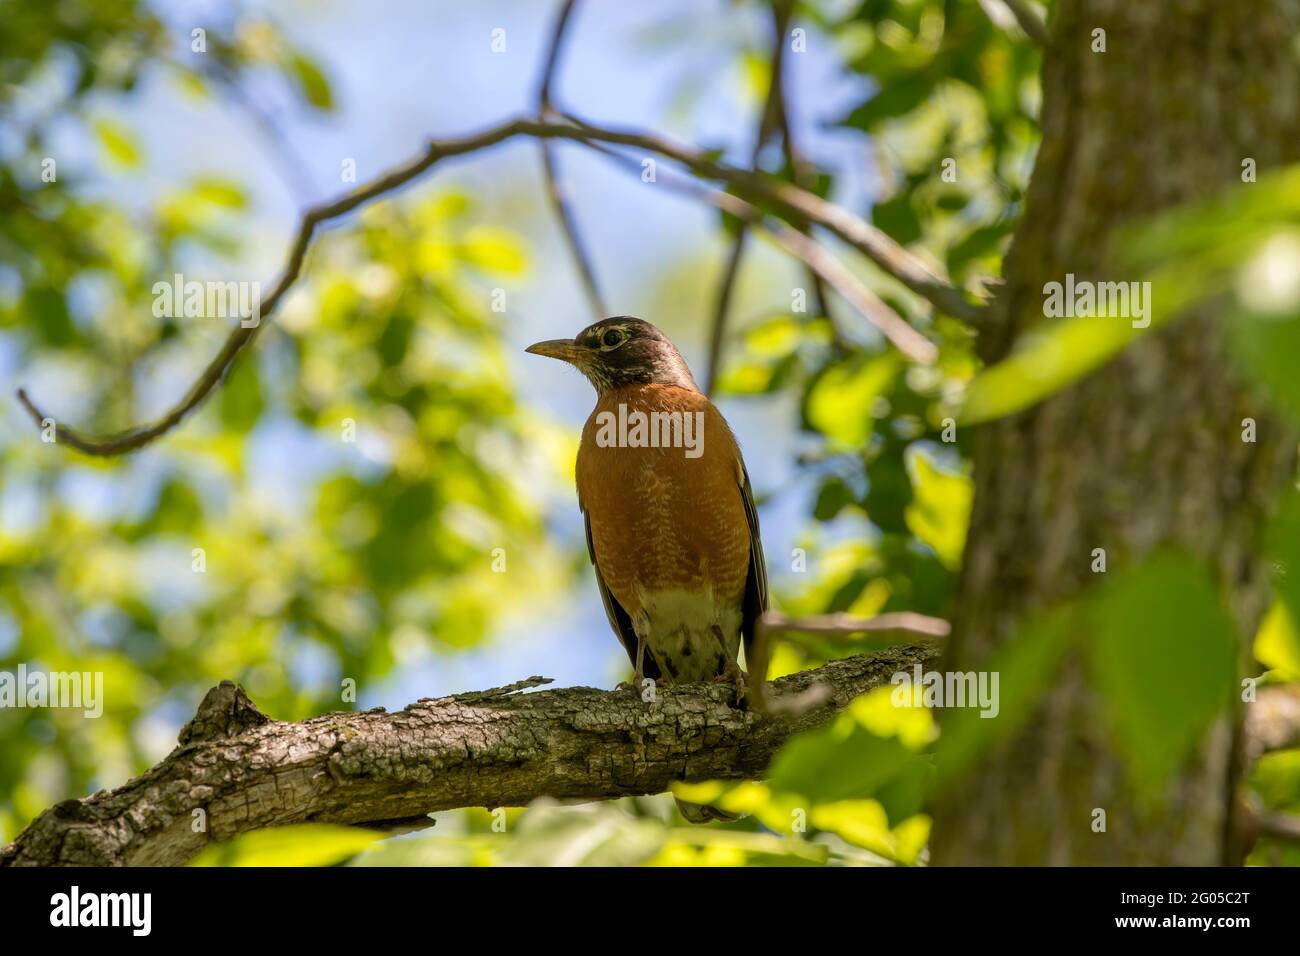 The American robin (Turdus migratorius) is a migratory songbird,  state bird of Connecticut, Michigan and Wisconsin. Stock Photo